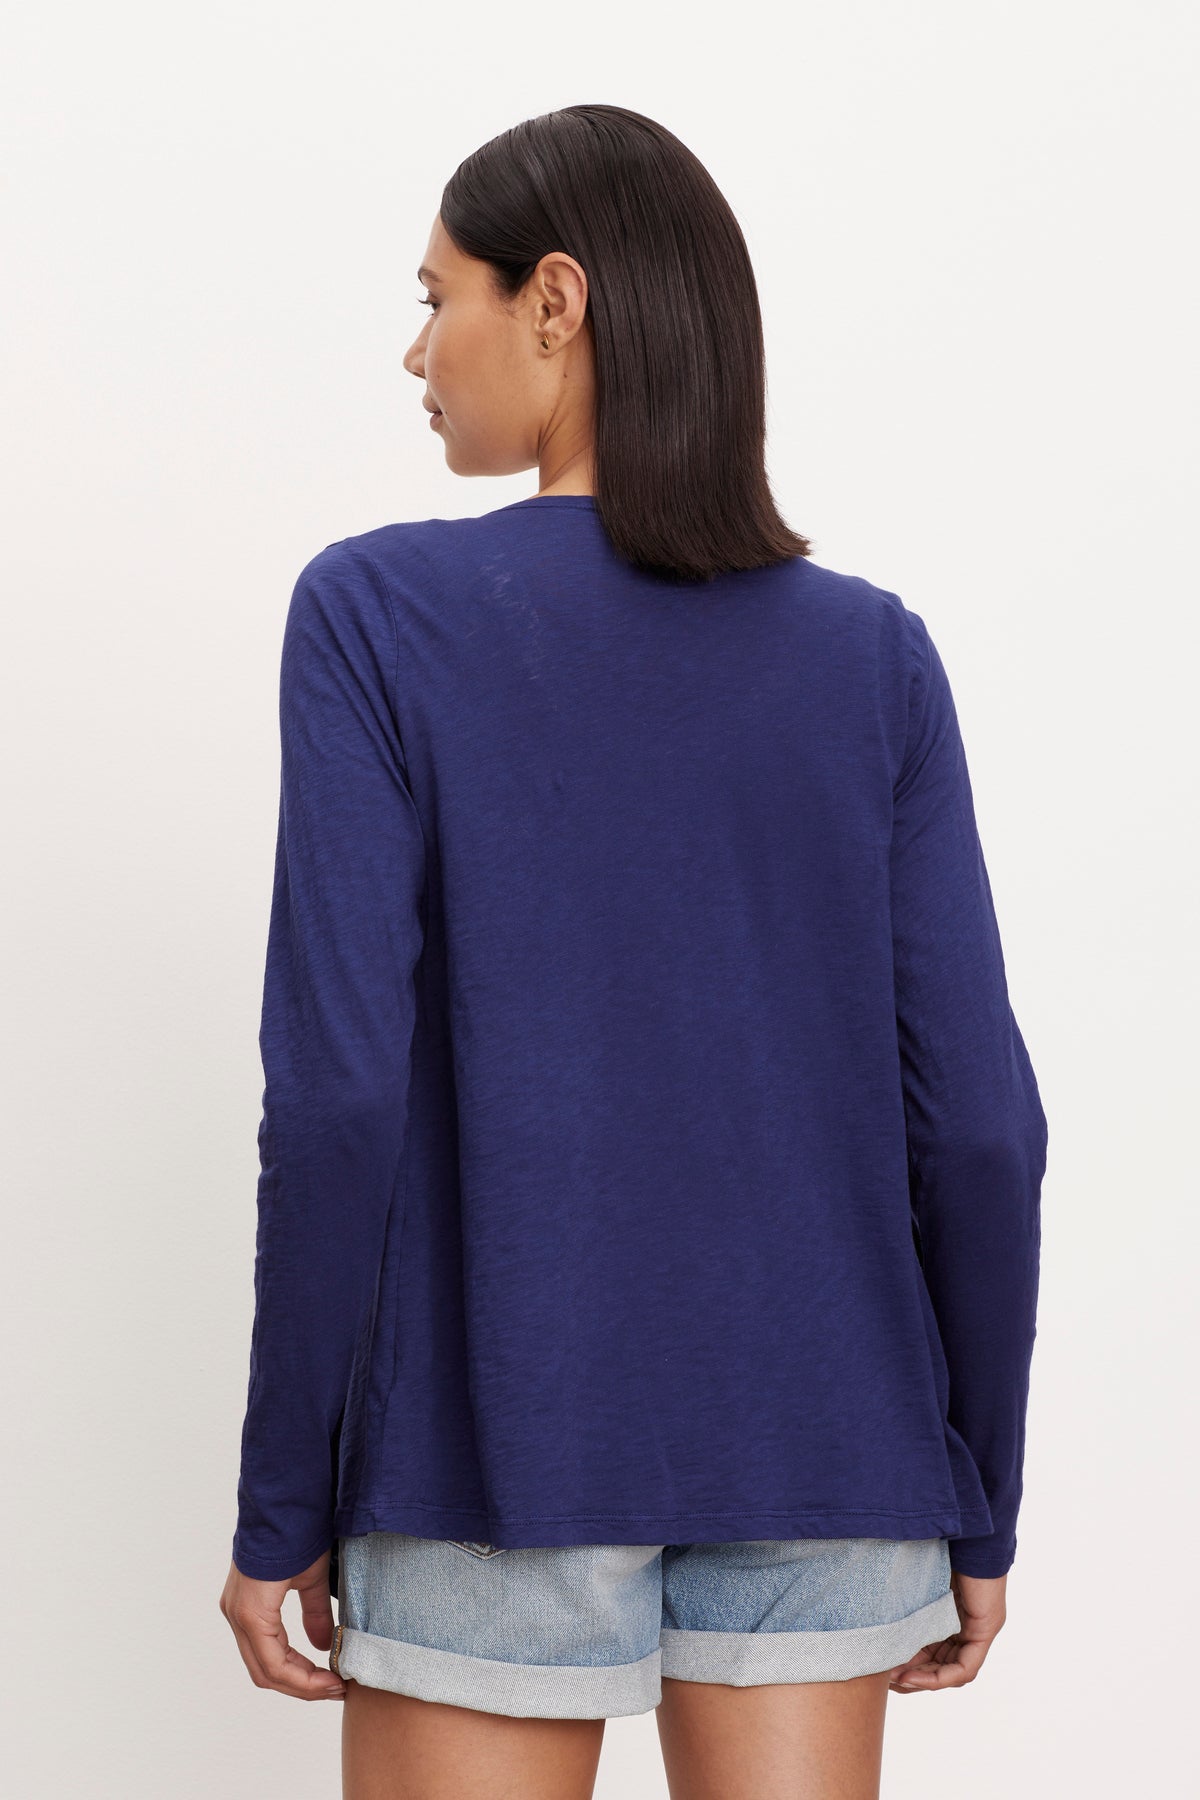 The back view of a woman wearing a Velvet by Graham & Spencer CHAMPAGNE OPEN CARDIGAN.-26743571841217